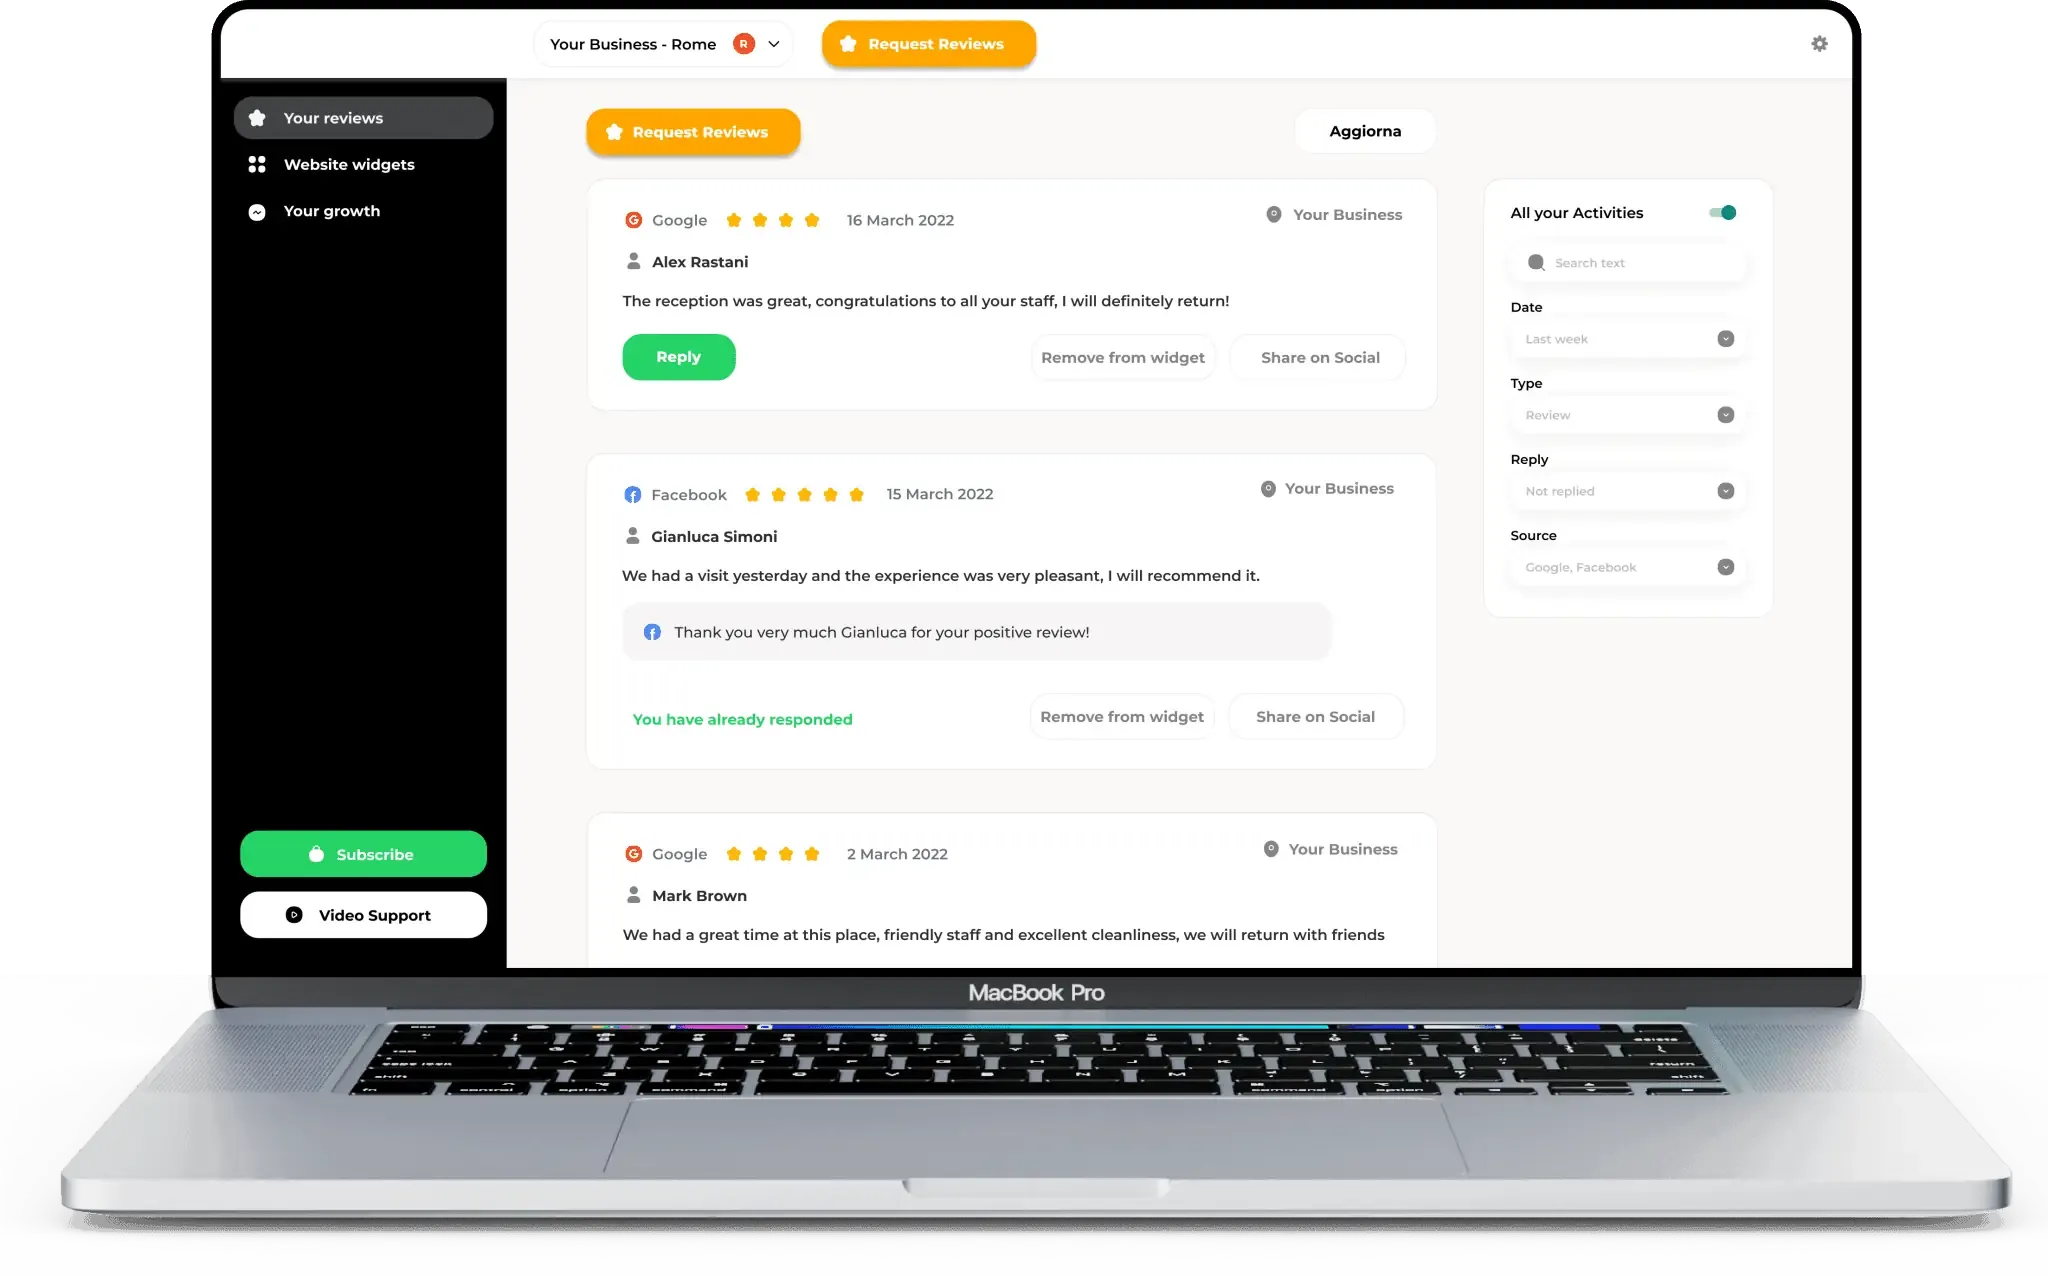 review management dashboard